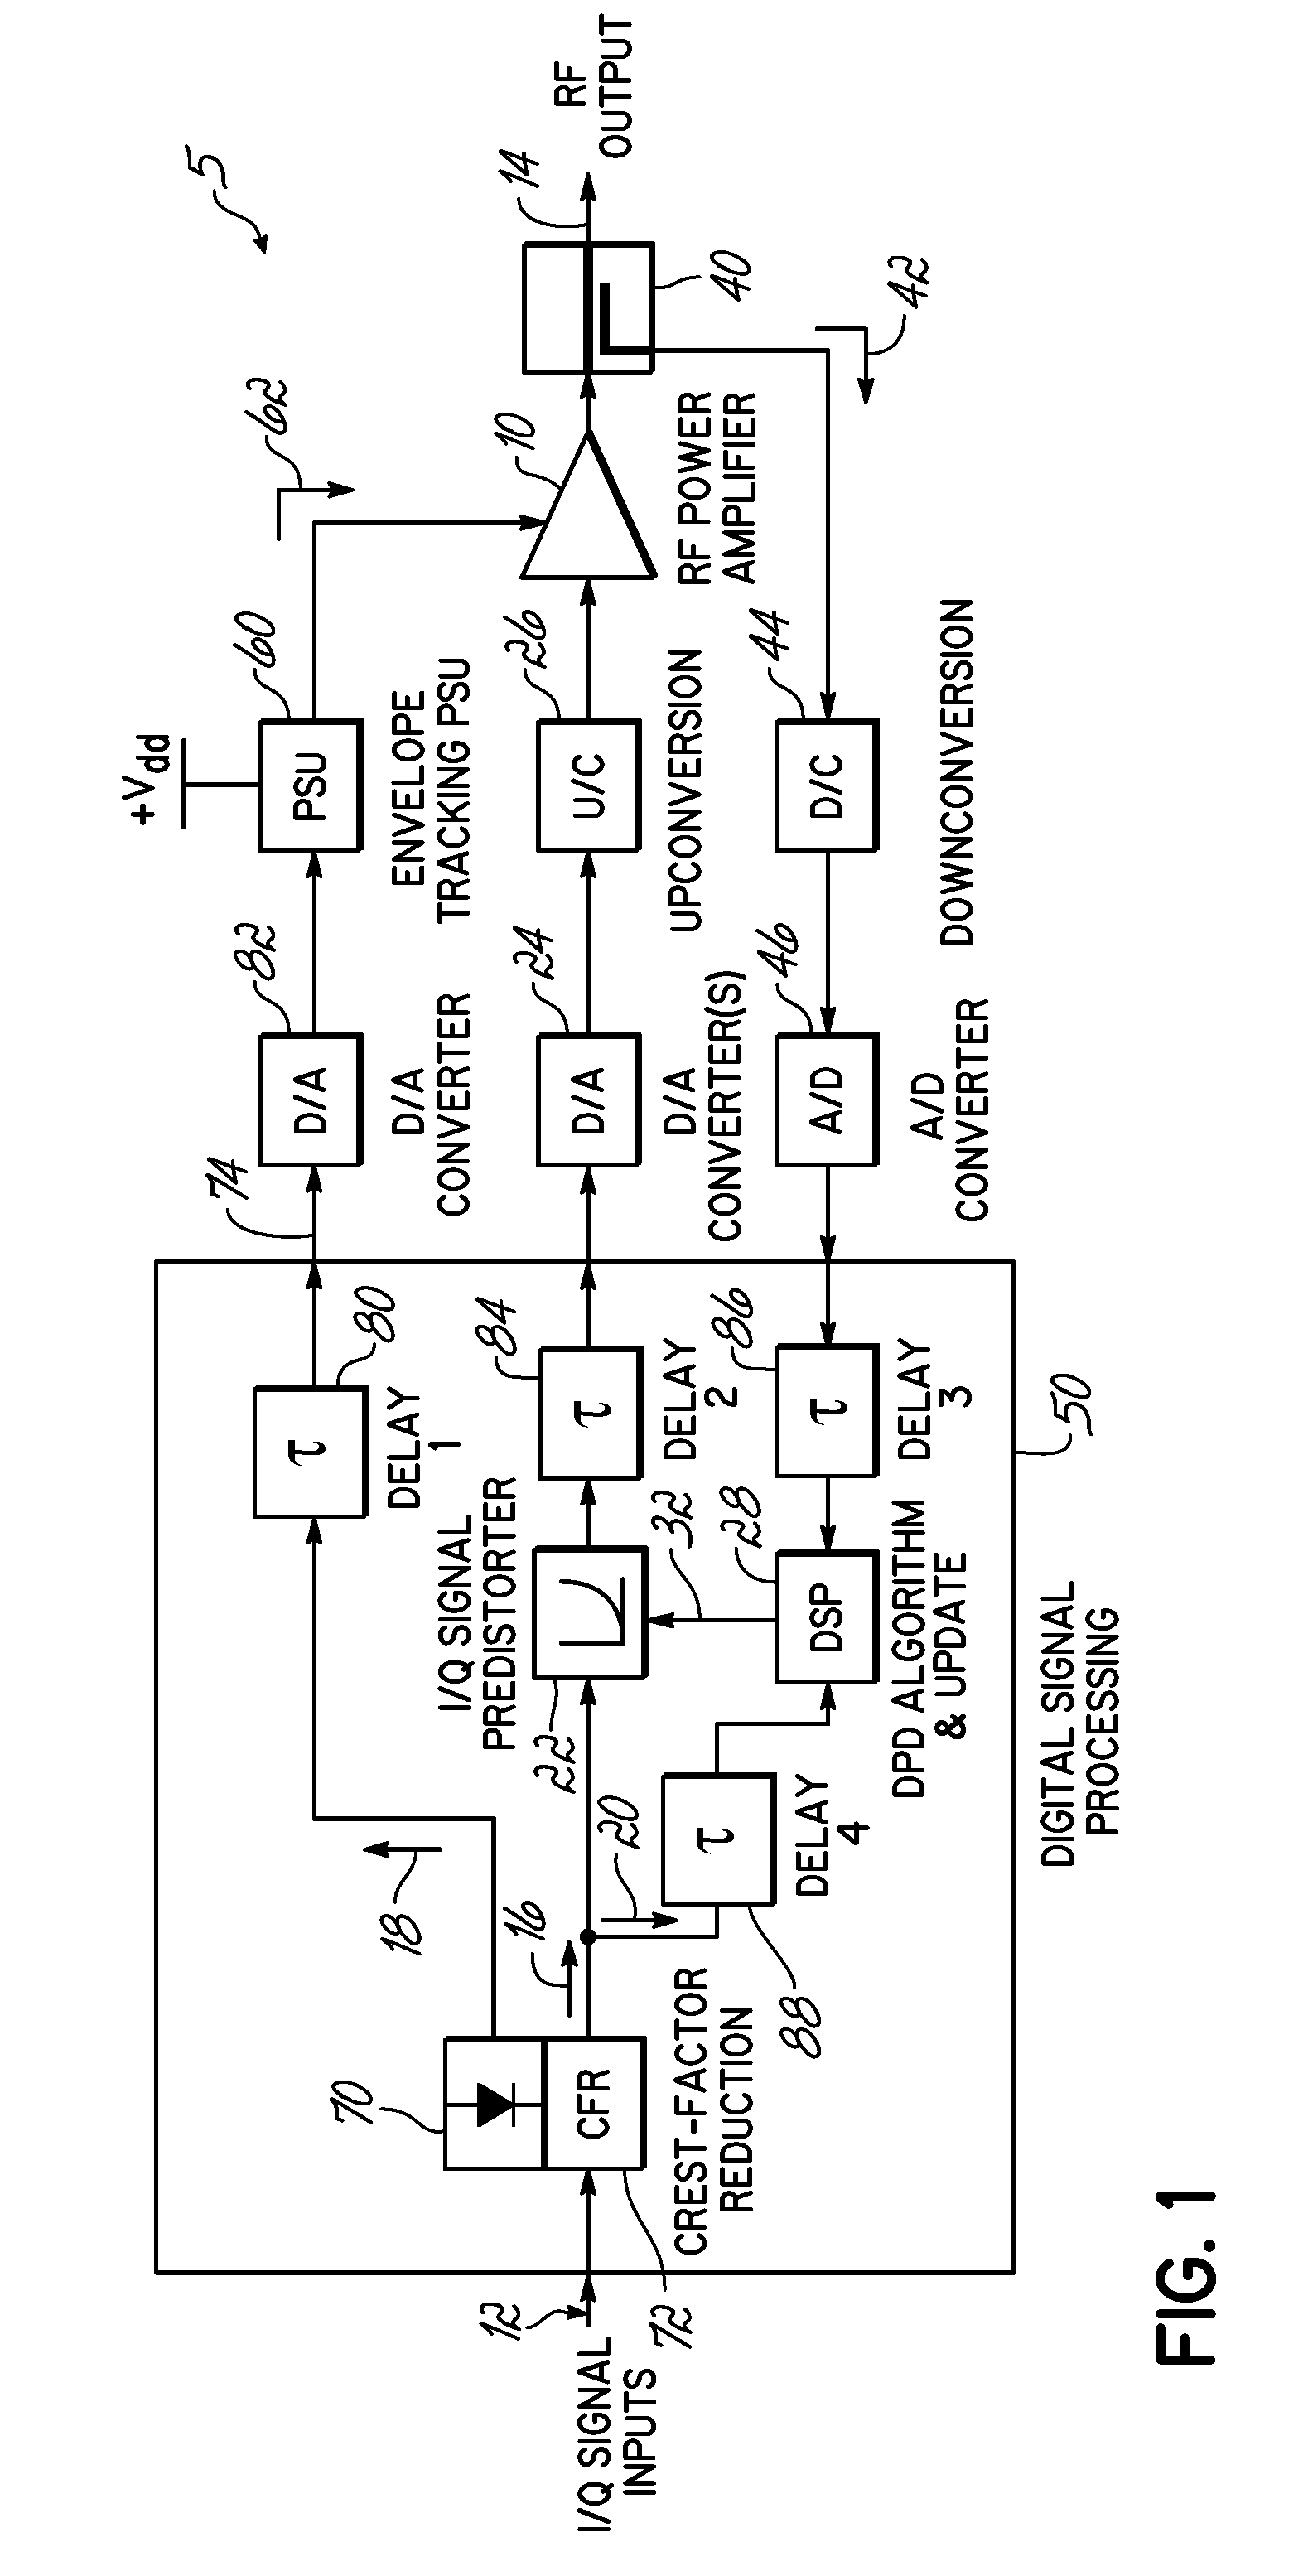 Integrated transceiver with envelope tracking